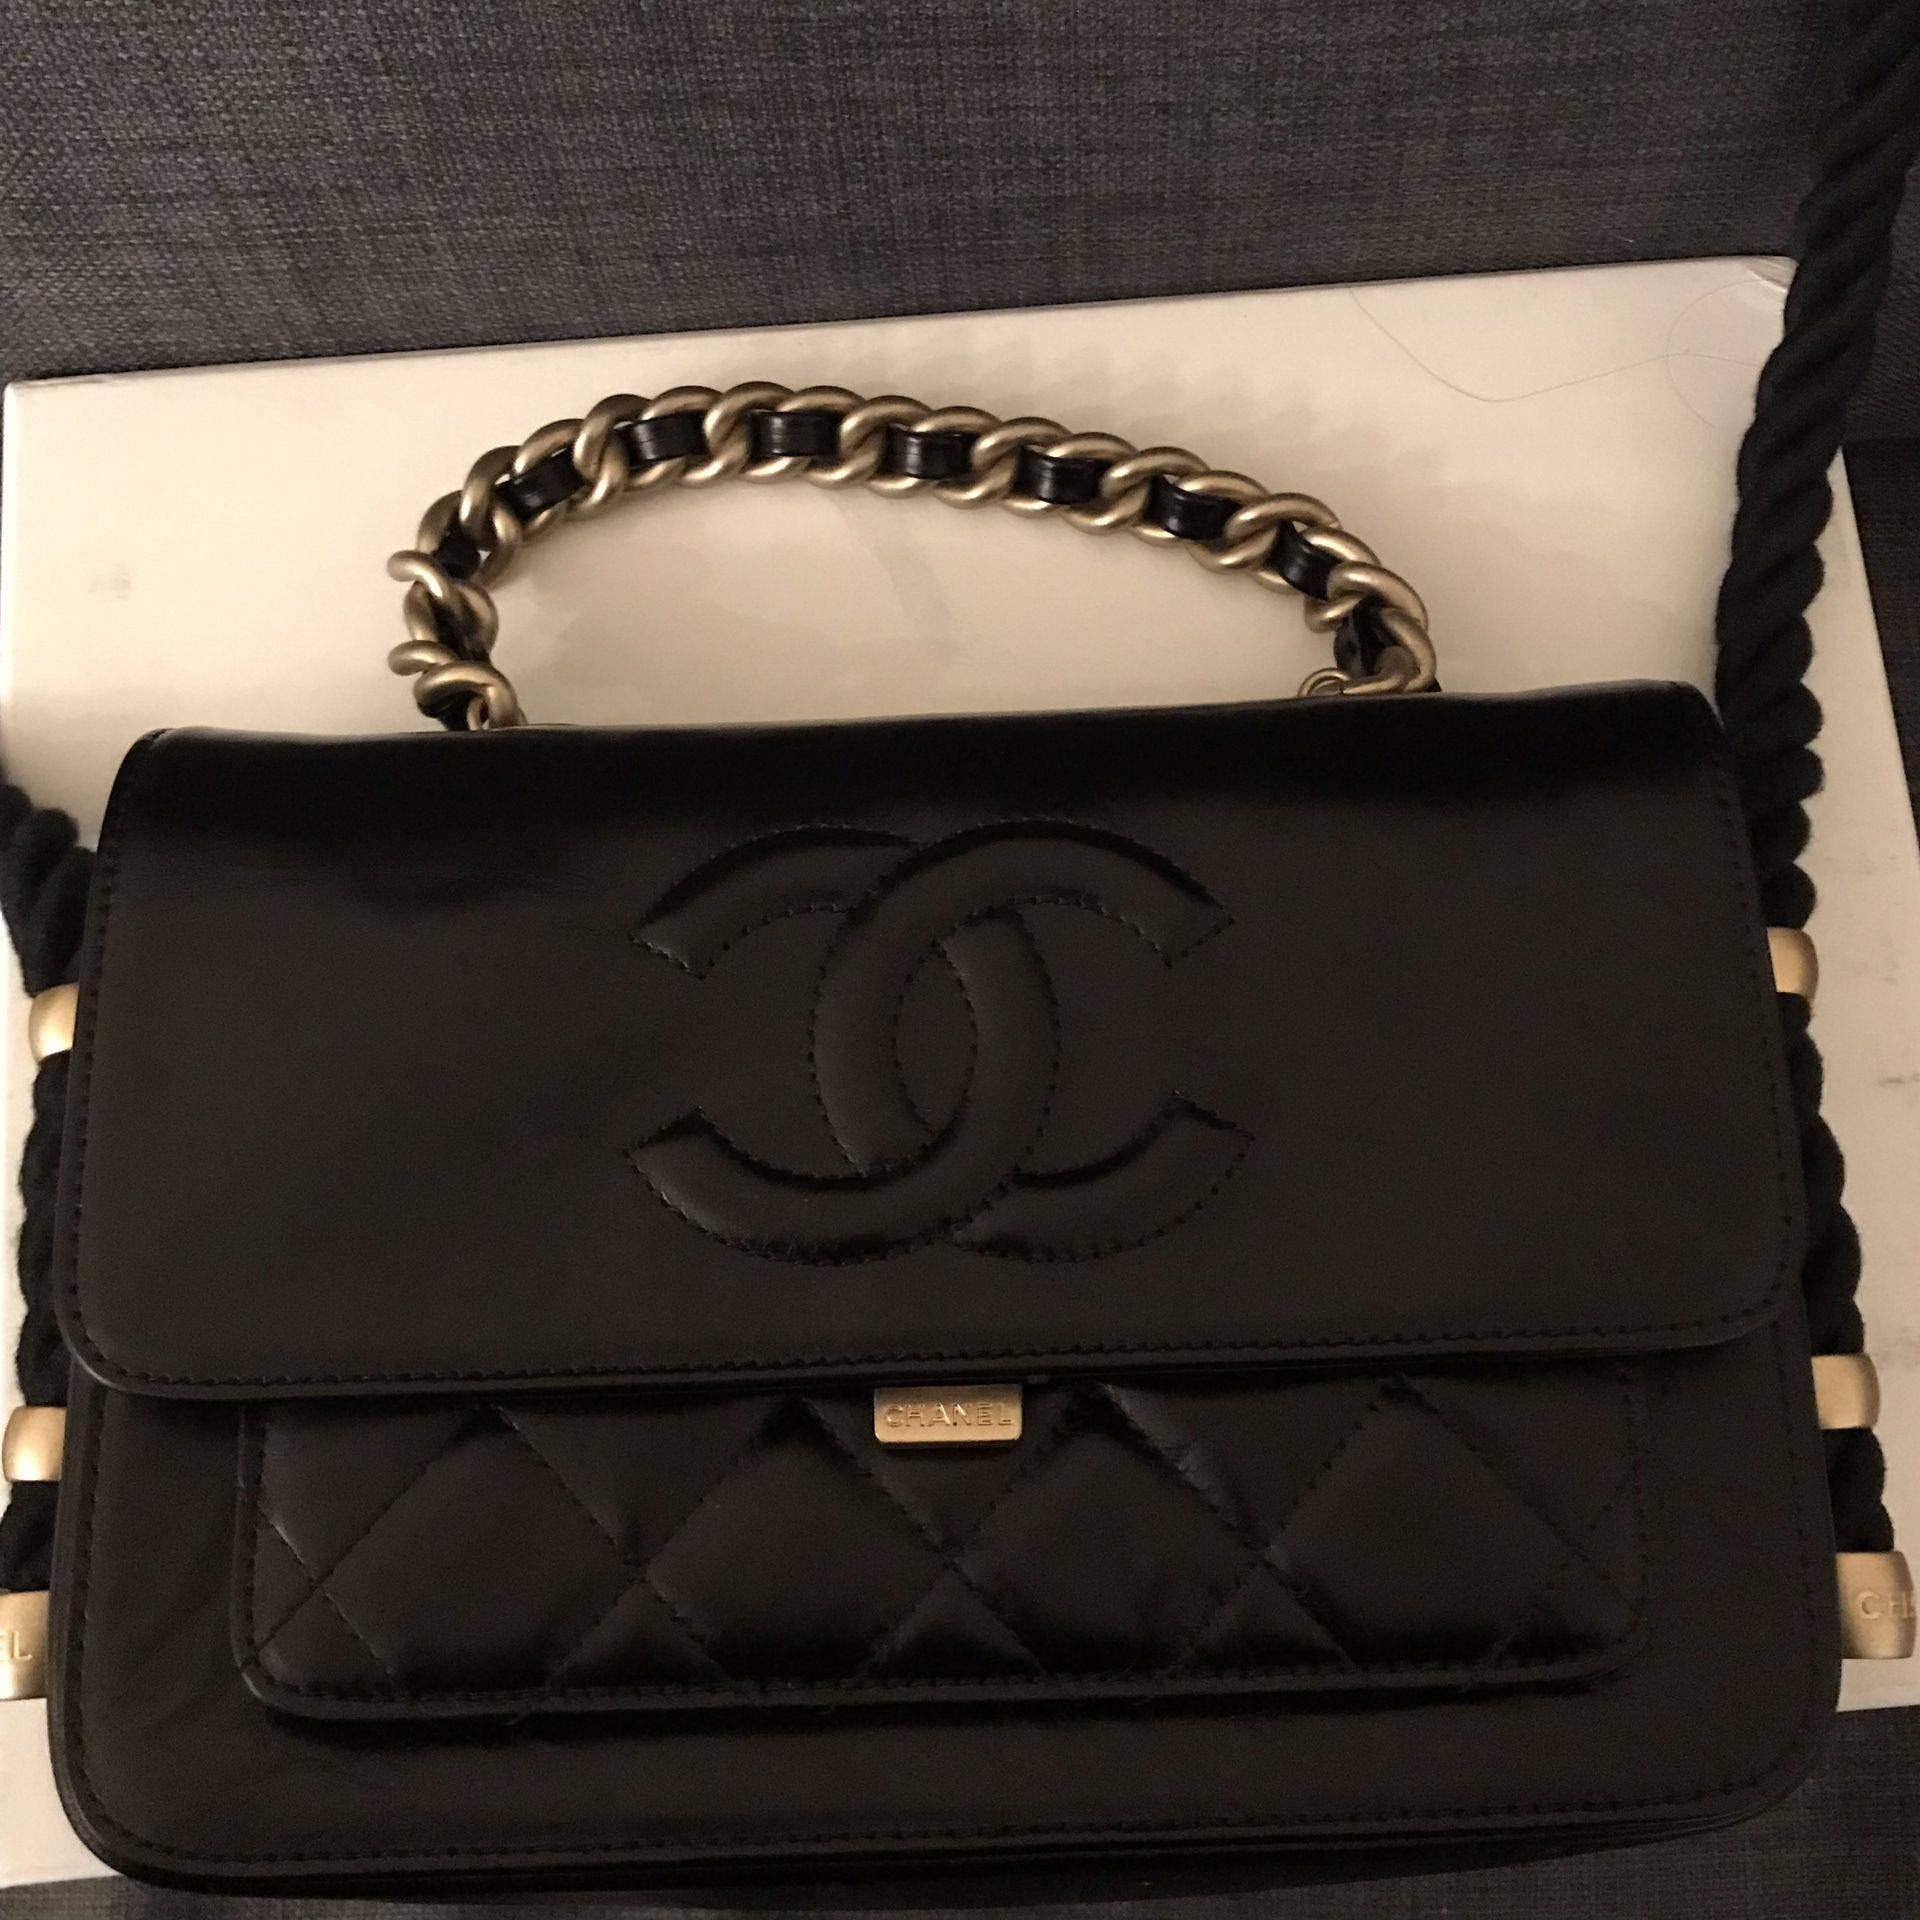 Chanel Cruise 2019 collection spring flap bag